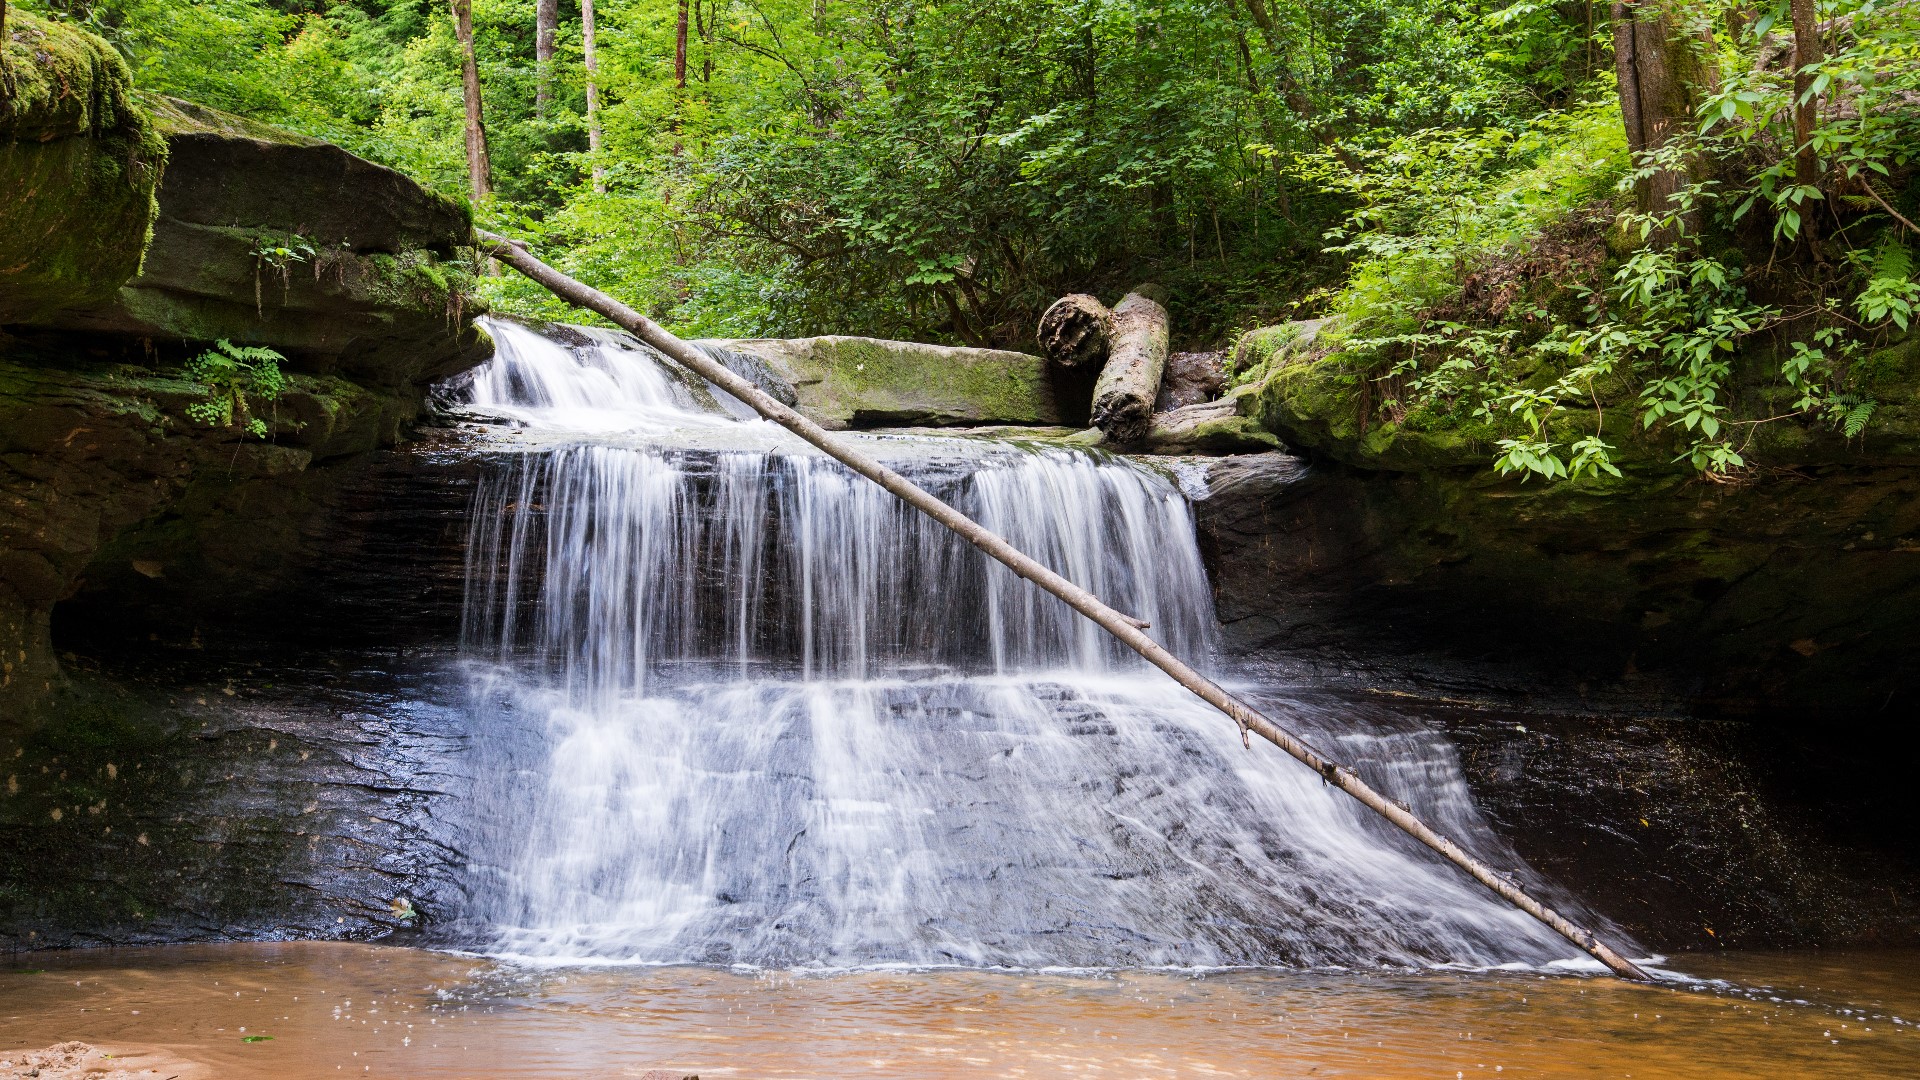 From Jefferson to McCreary County, there are plenty of waterfalls to hike to on your next adventure in Kentucky.